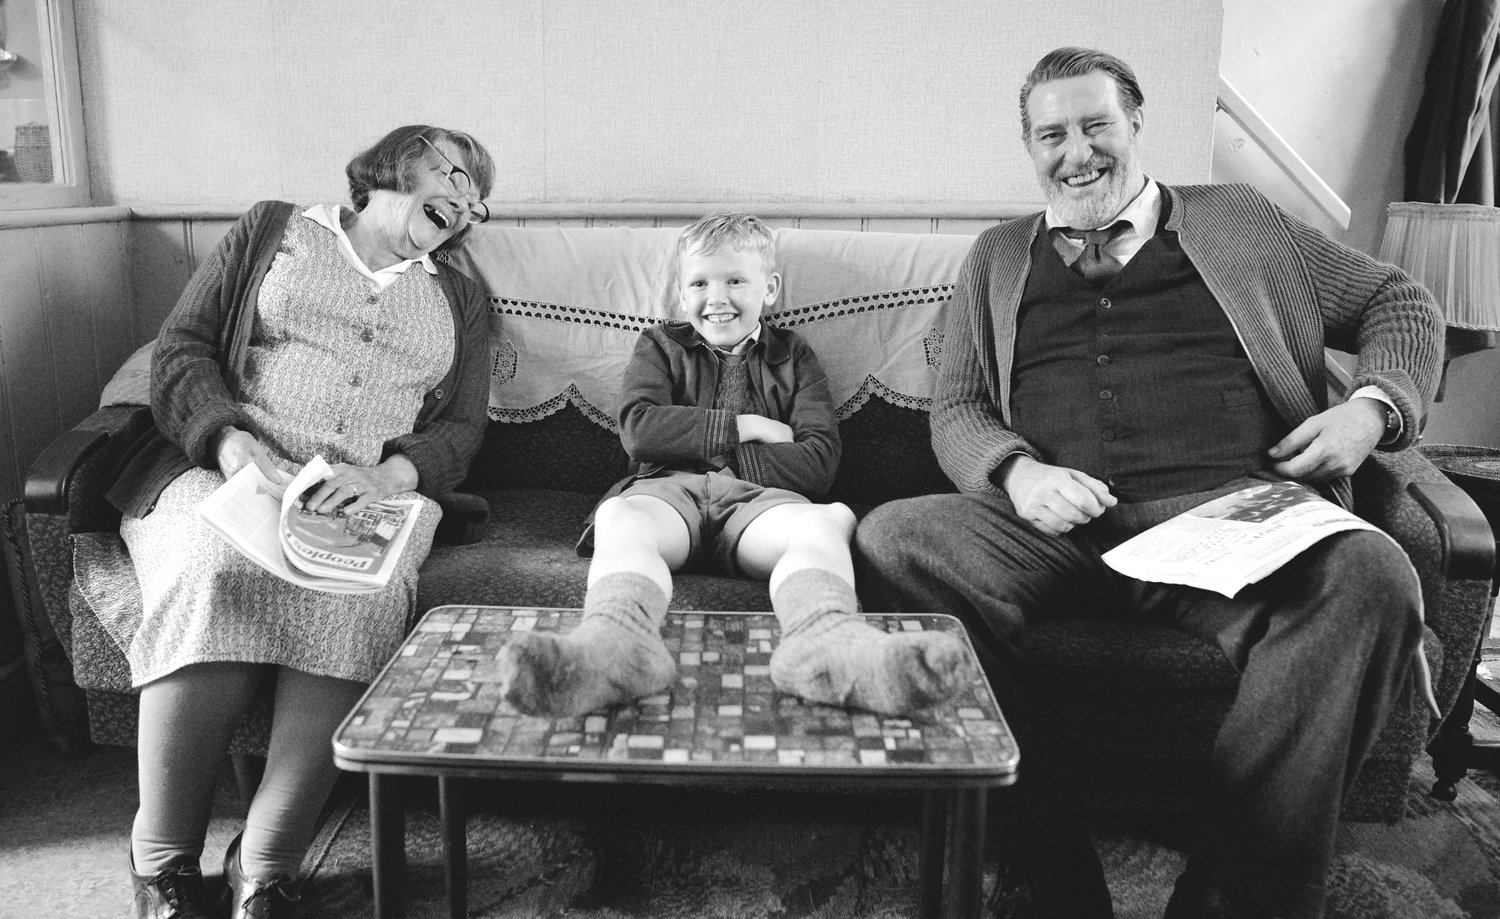 Heartfelt — From left, Judi Dench as “Granny,” Jude Hill as “Buddy” and Ciarán Hinds as “Pop” in director Kenneth Branagh’s “Belfast.”